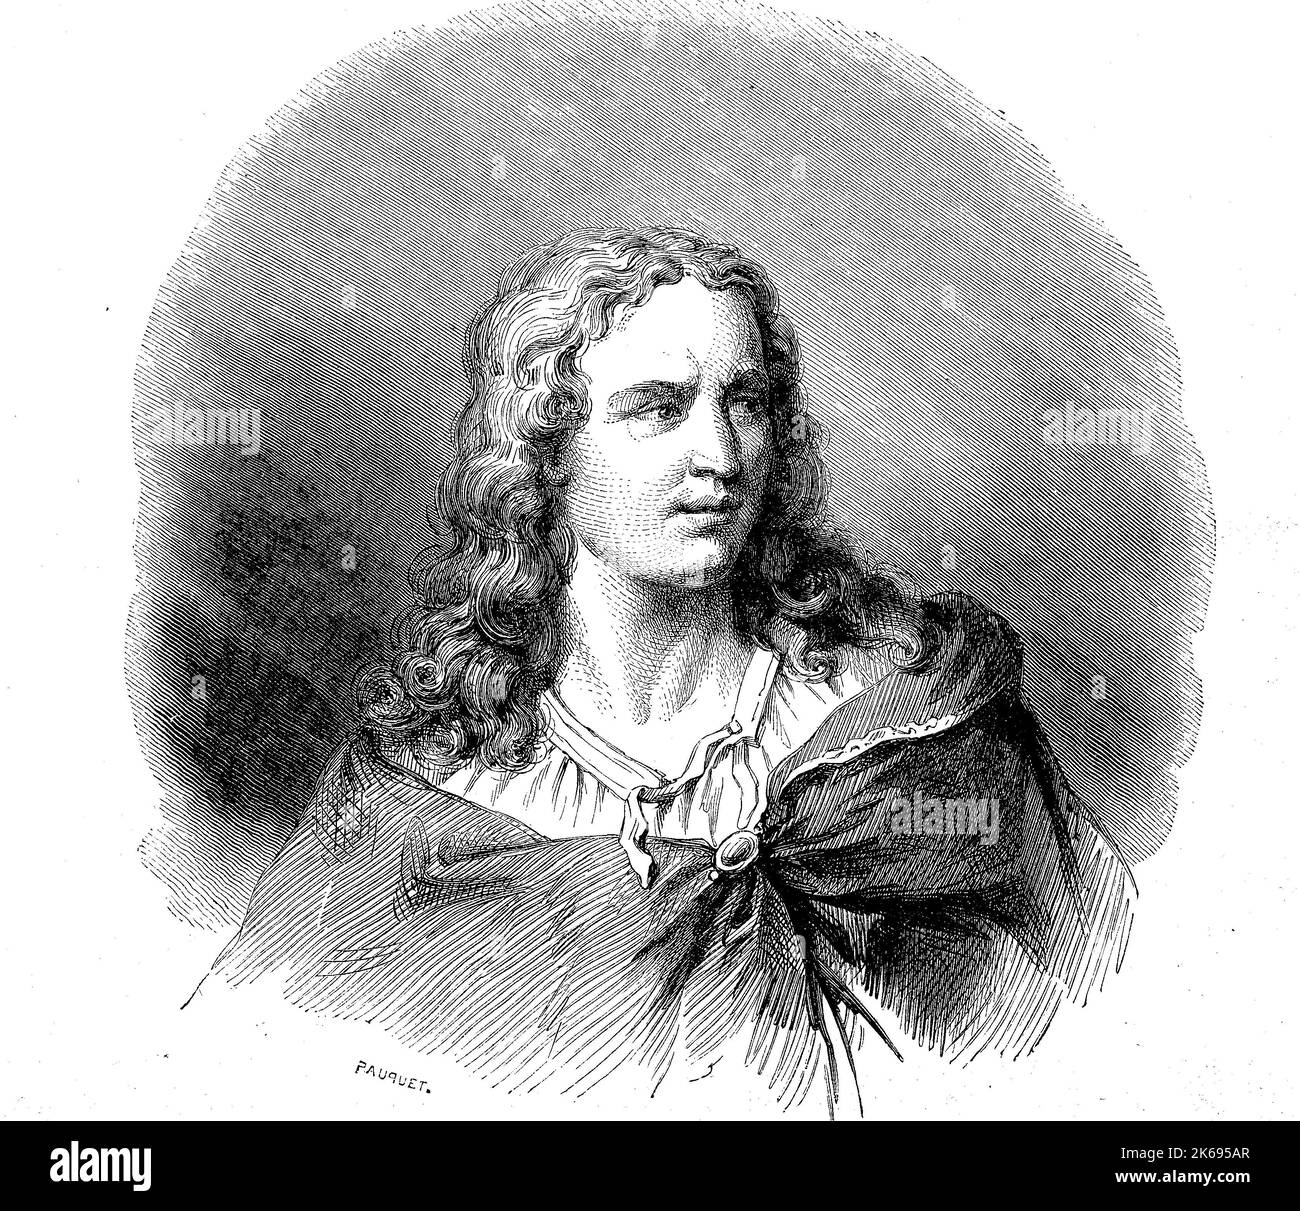 Digital improved reproduction, Gérard Audran or Girard Audran, born 1640, died 1703, was a French engraver, original woodprint from th 19th century Stock Photo